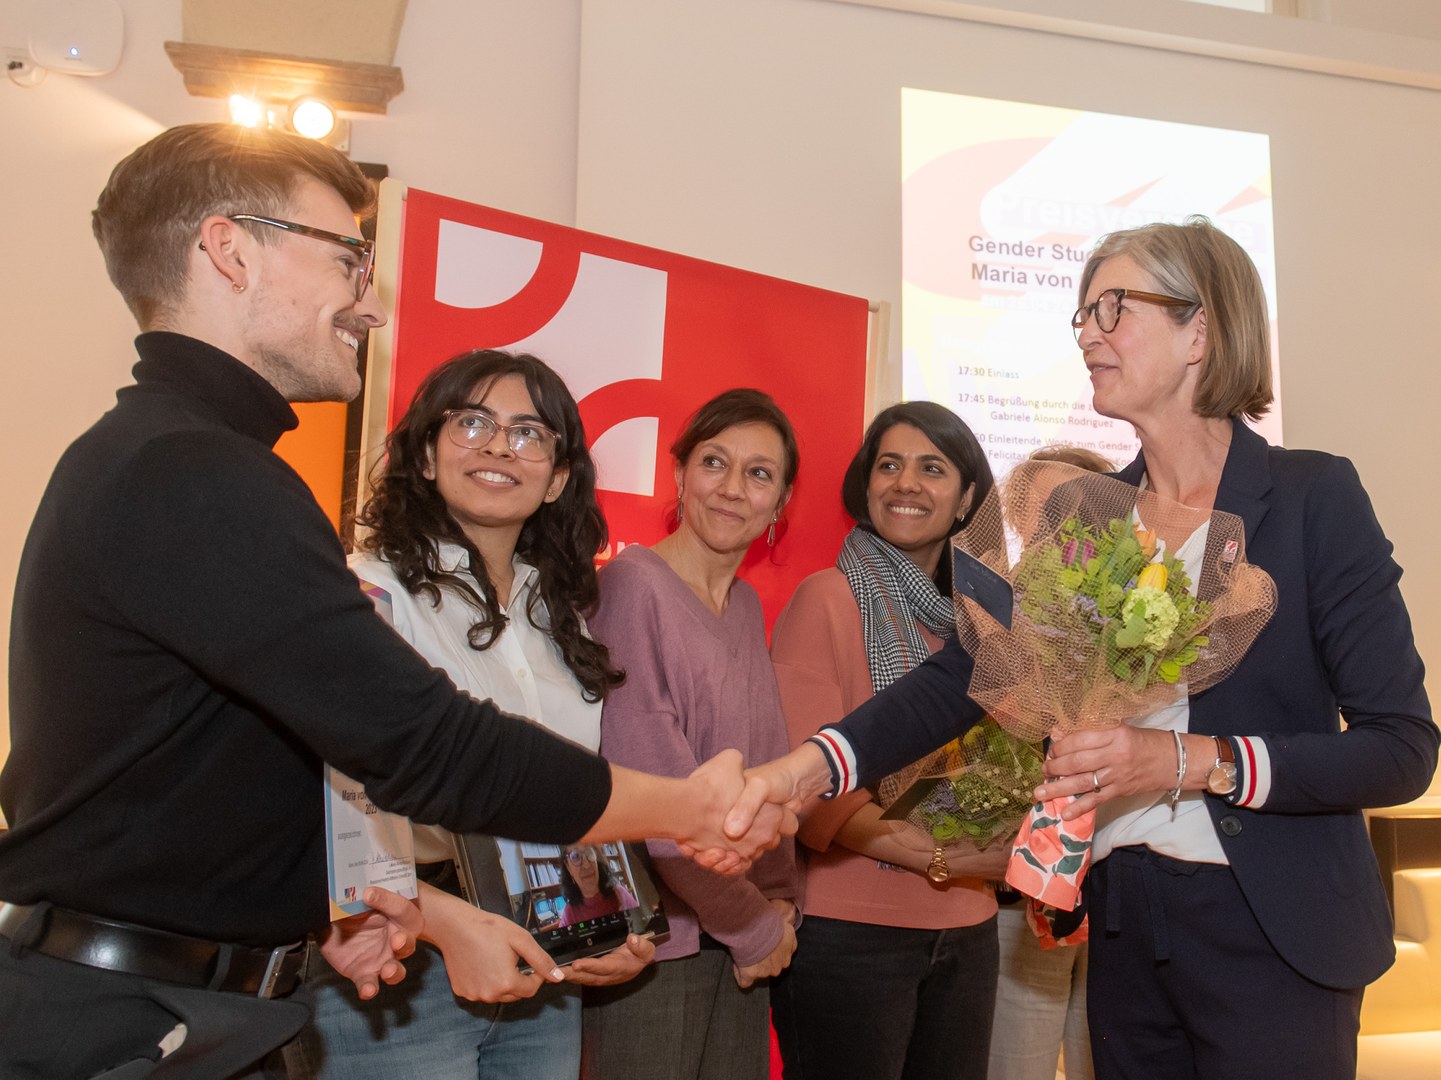 The University of Bonn Gender Equality Office has awarded the Gender Studies Prize 2023 and the Maria von Linden Gender Equality Prize 2023.